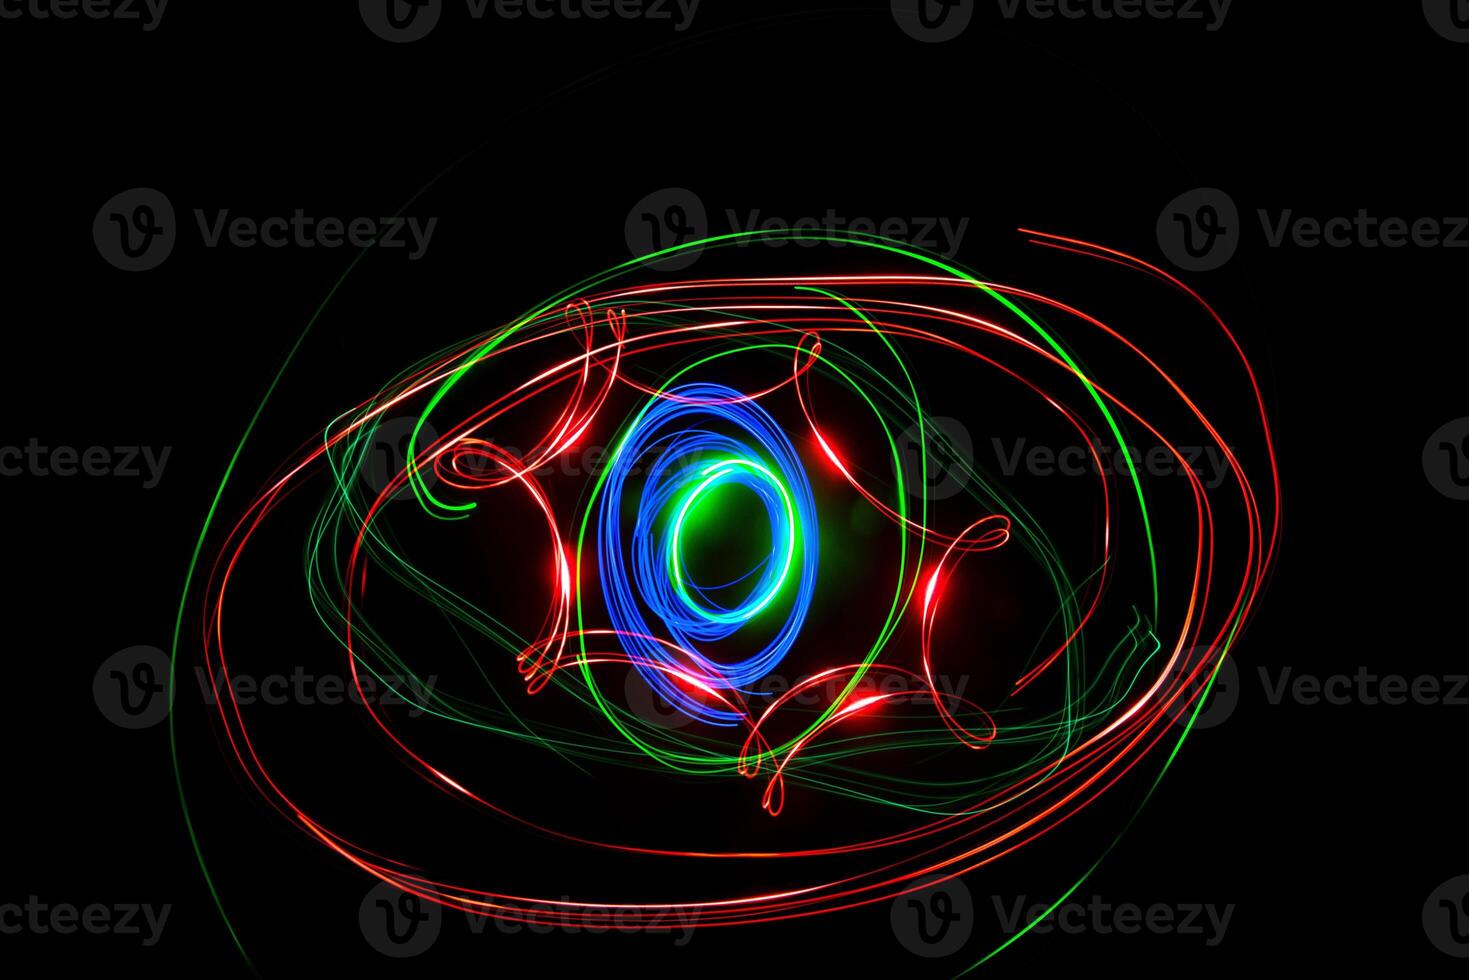 Moving swirls of colored lights photo